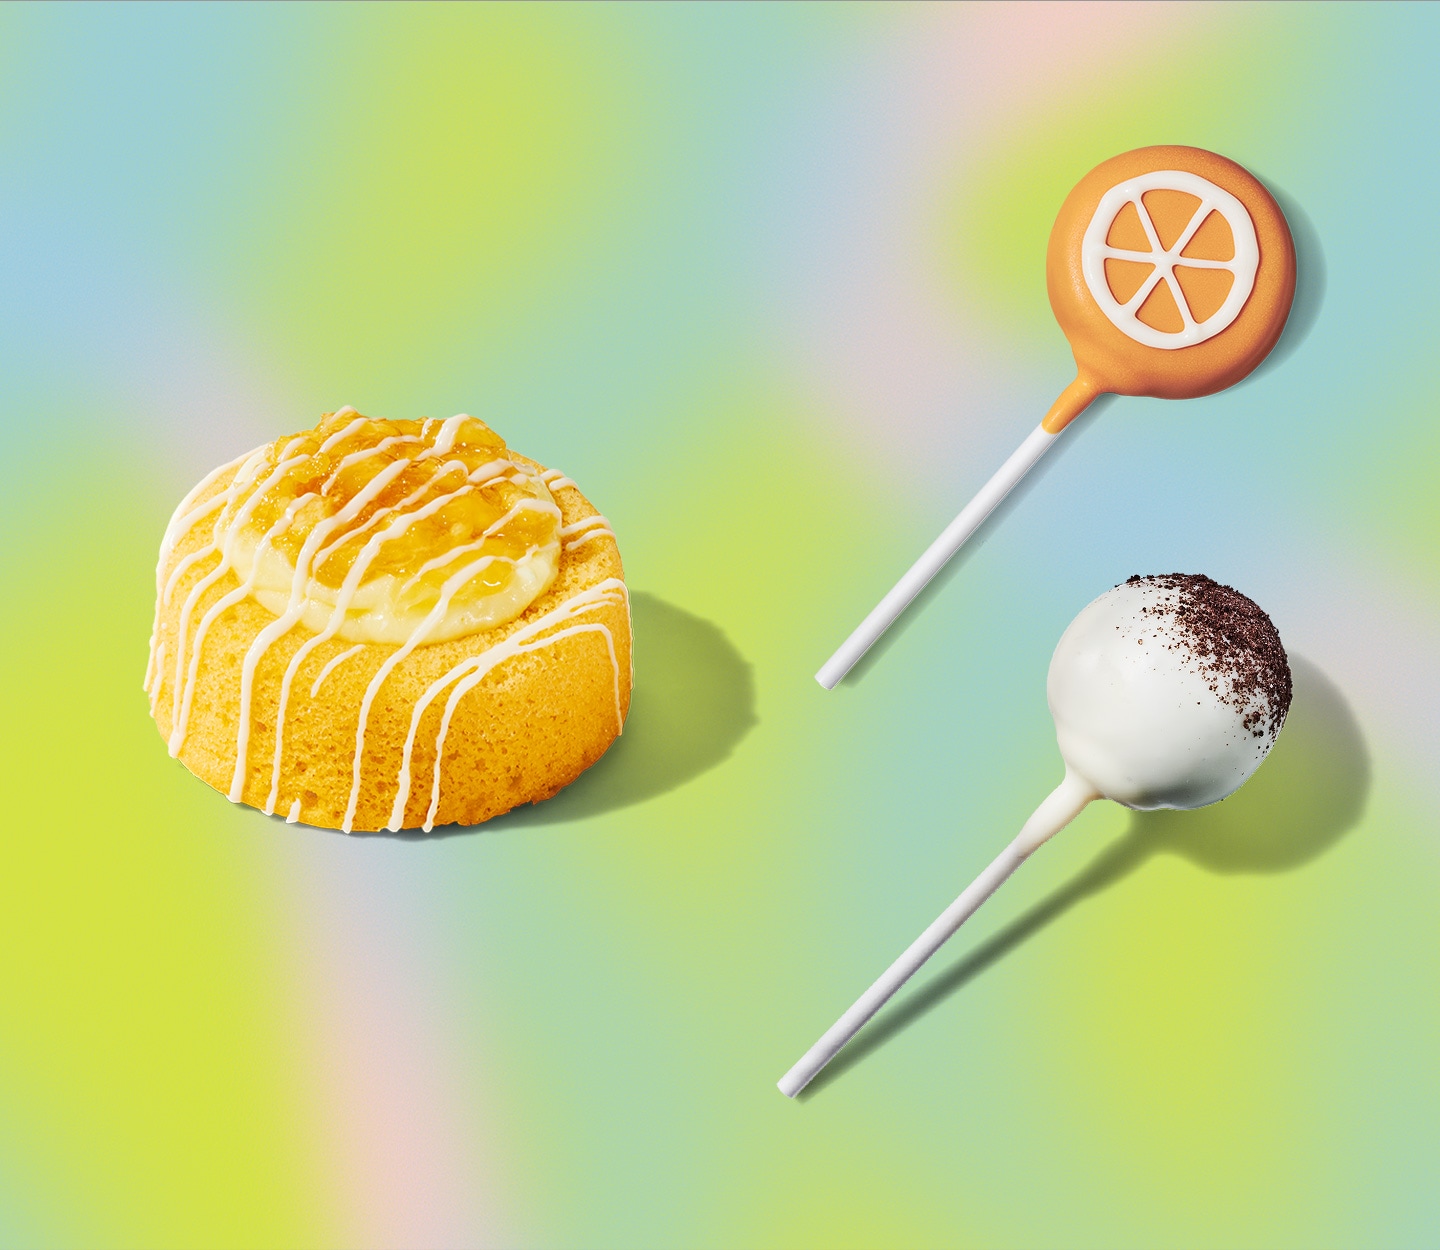 A round yellow cake with icing, an orange cake pop with orange slices drawn in icing, a white cake pop with chocolate cookie crumbs.